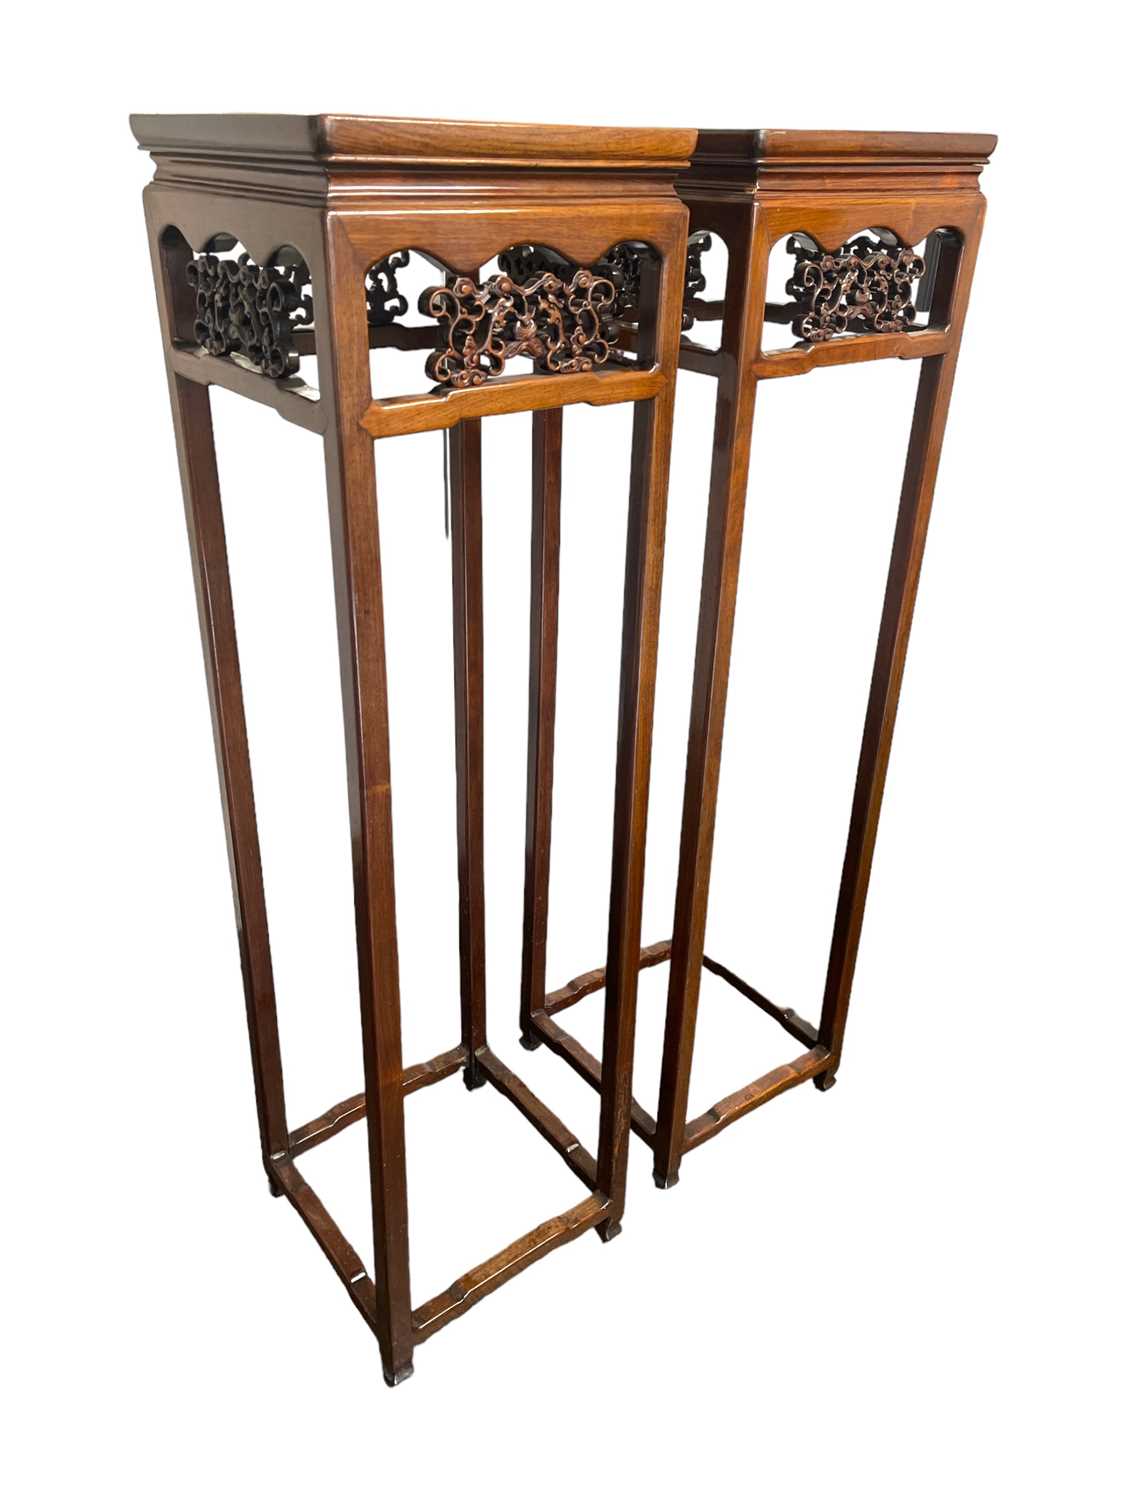 QUEEN INTEREST - FREDDIE MERCURY OWNED PLANT STANDS - EX SOTHEBY'S 'WORLD OF HIS OWN' AUCTION.